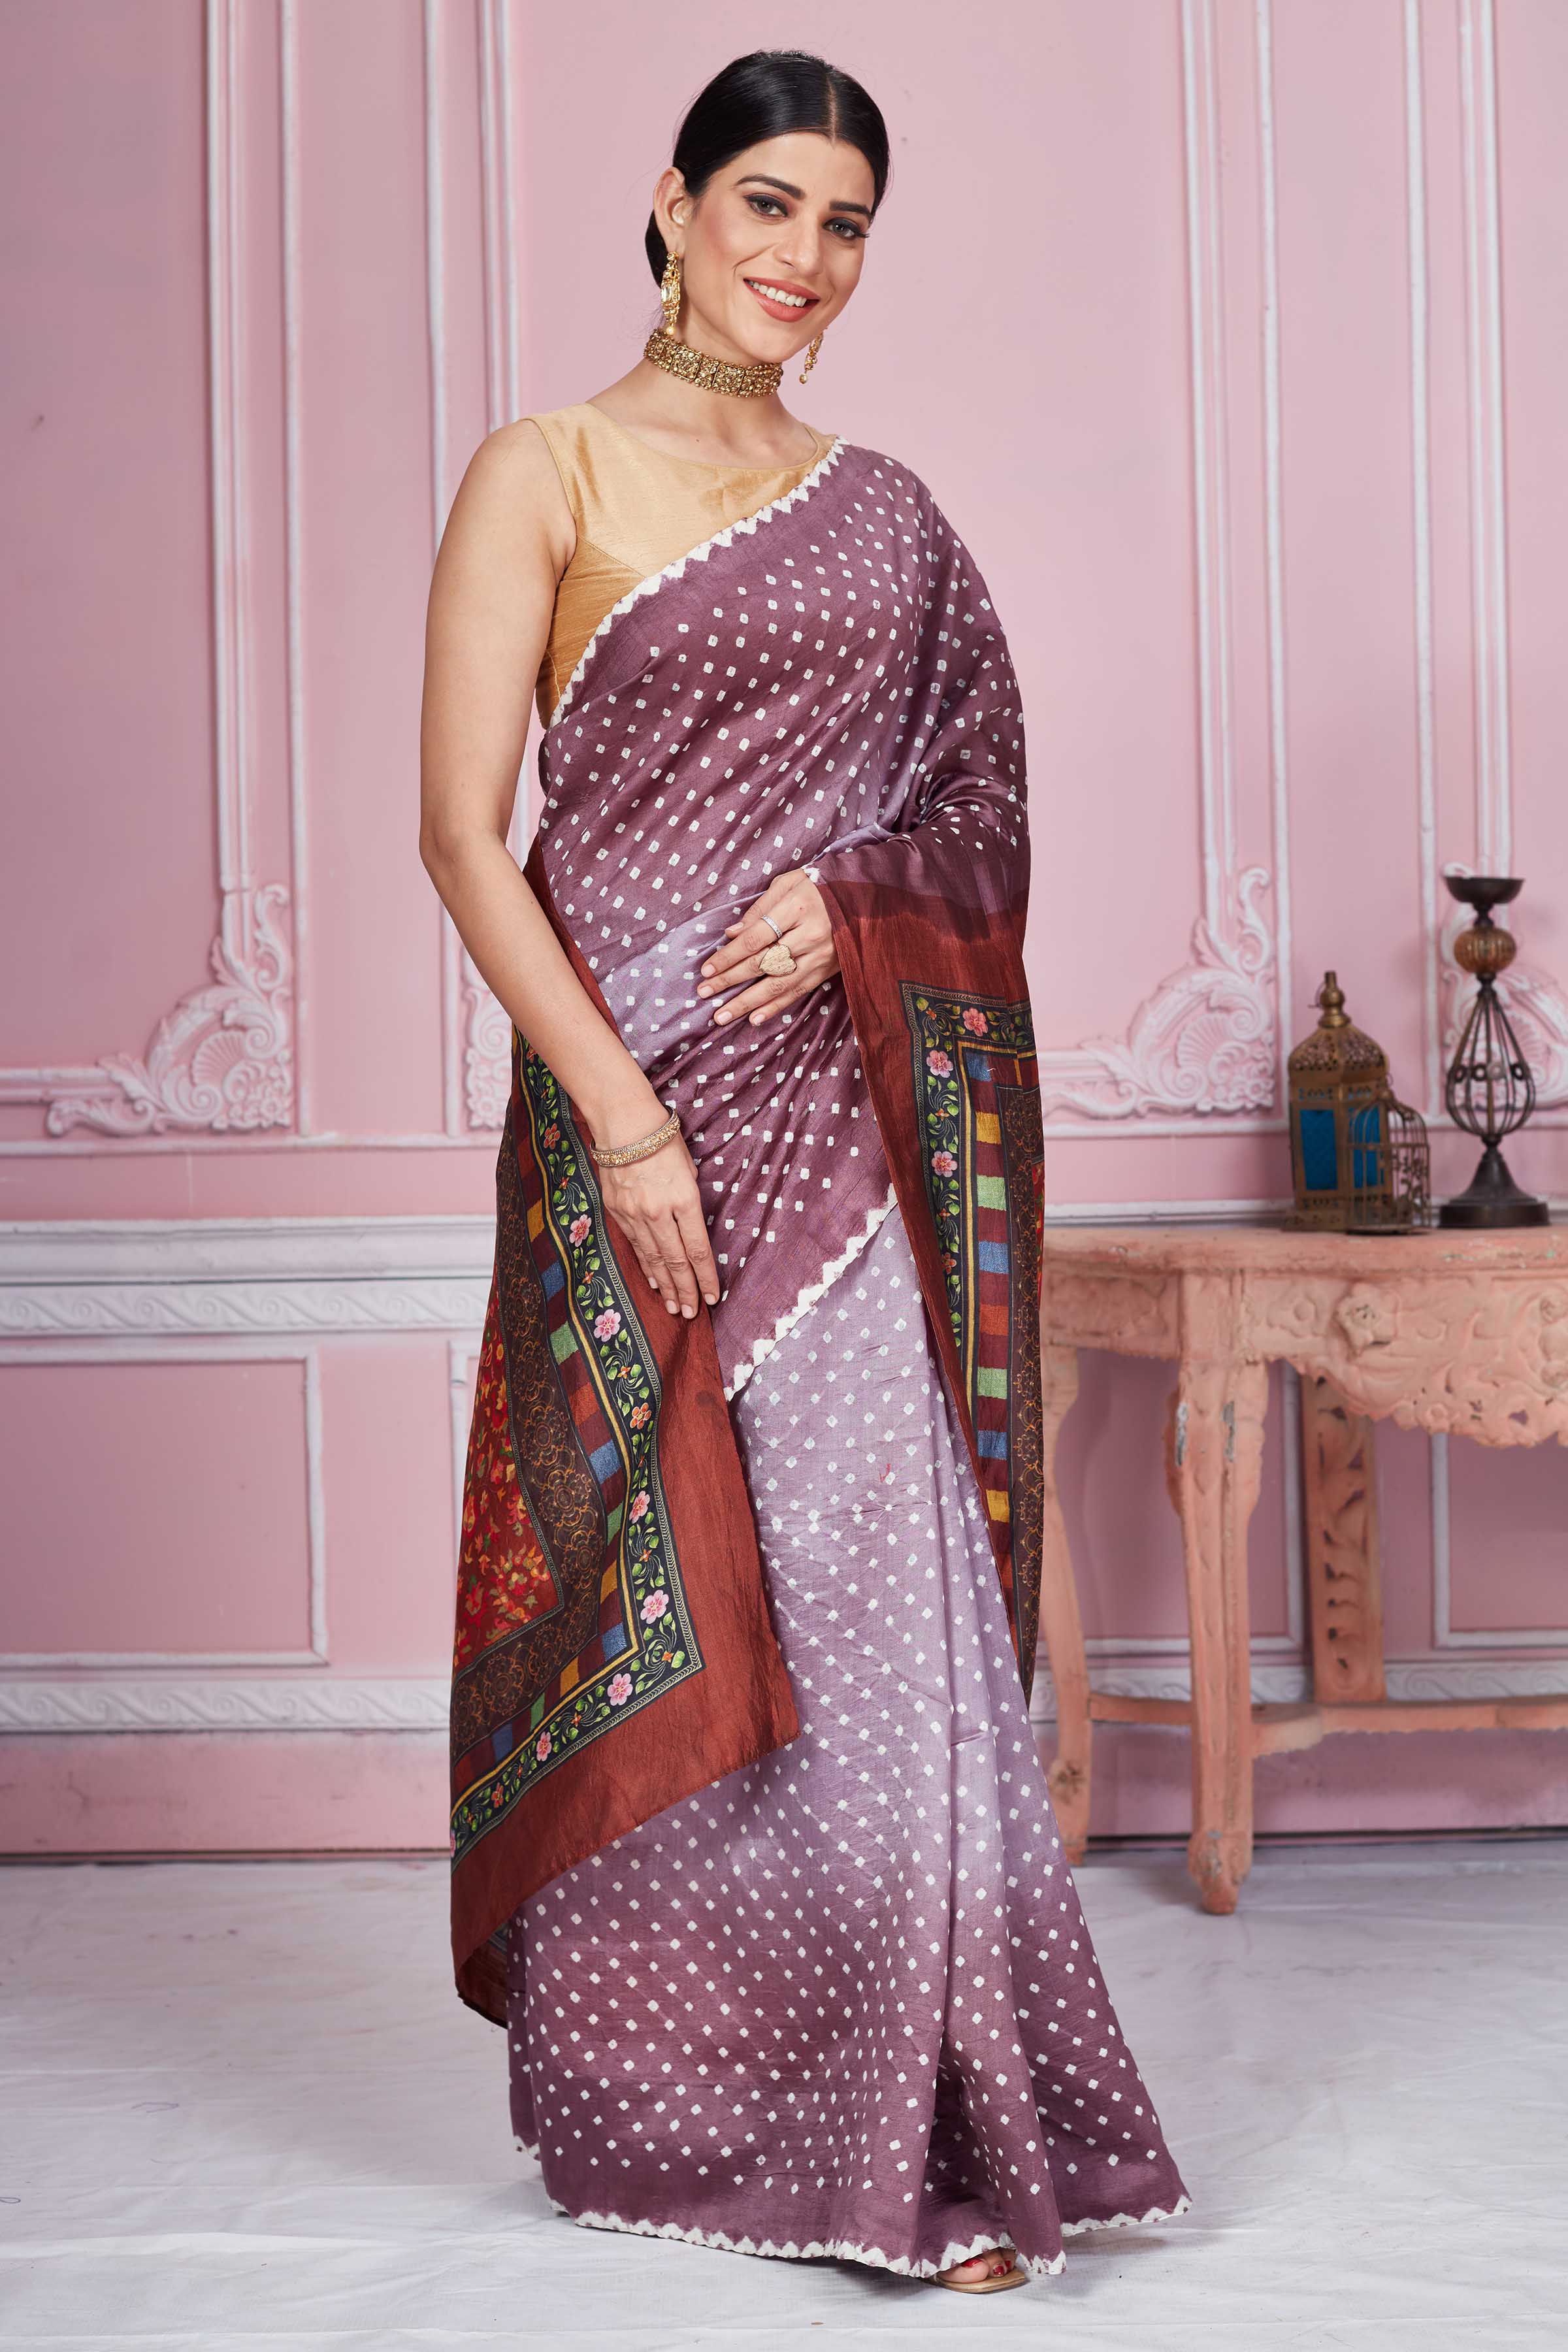 Buy ombre lavender bandhej tussar Pichwai sari online in USA. Look your best on festive occasions in latest designer sarees, pure silk sarees, Kanjivaram silk saris, handwoven saris, tussar silk sarees, embroidered saris from Pure Elegance Indian clothing store in USA.-side